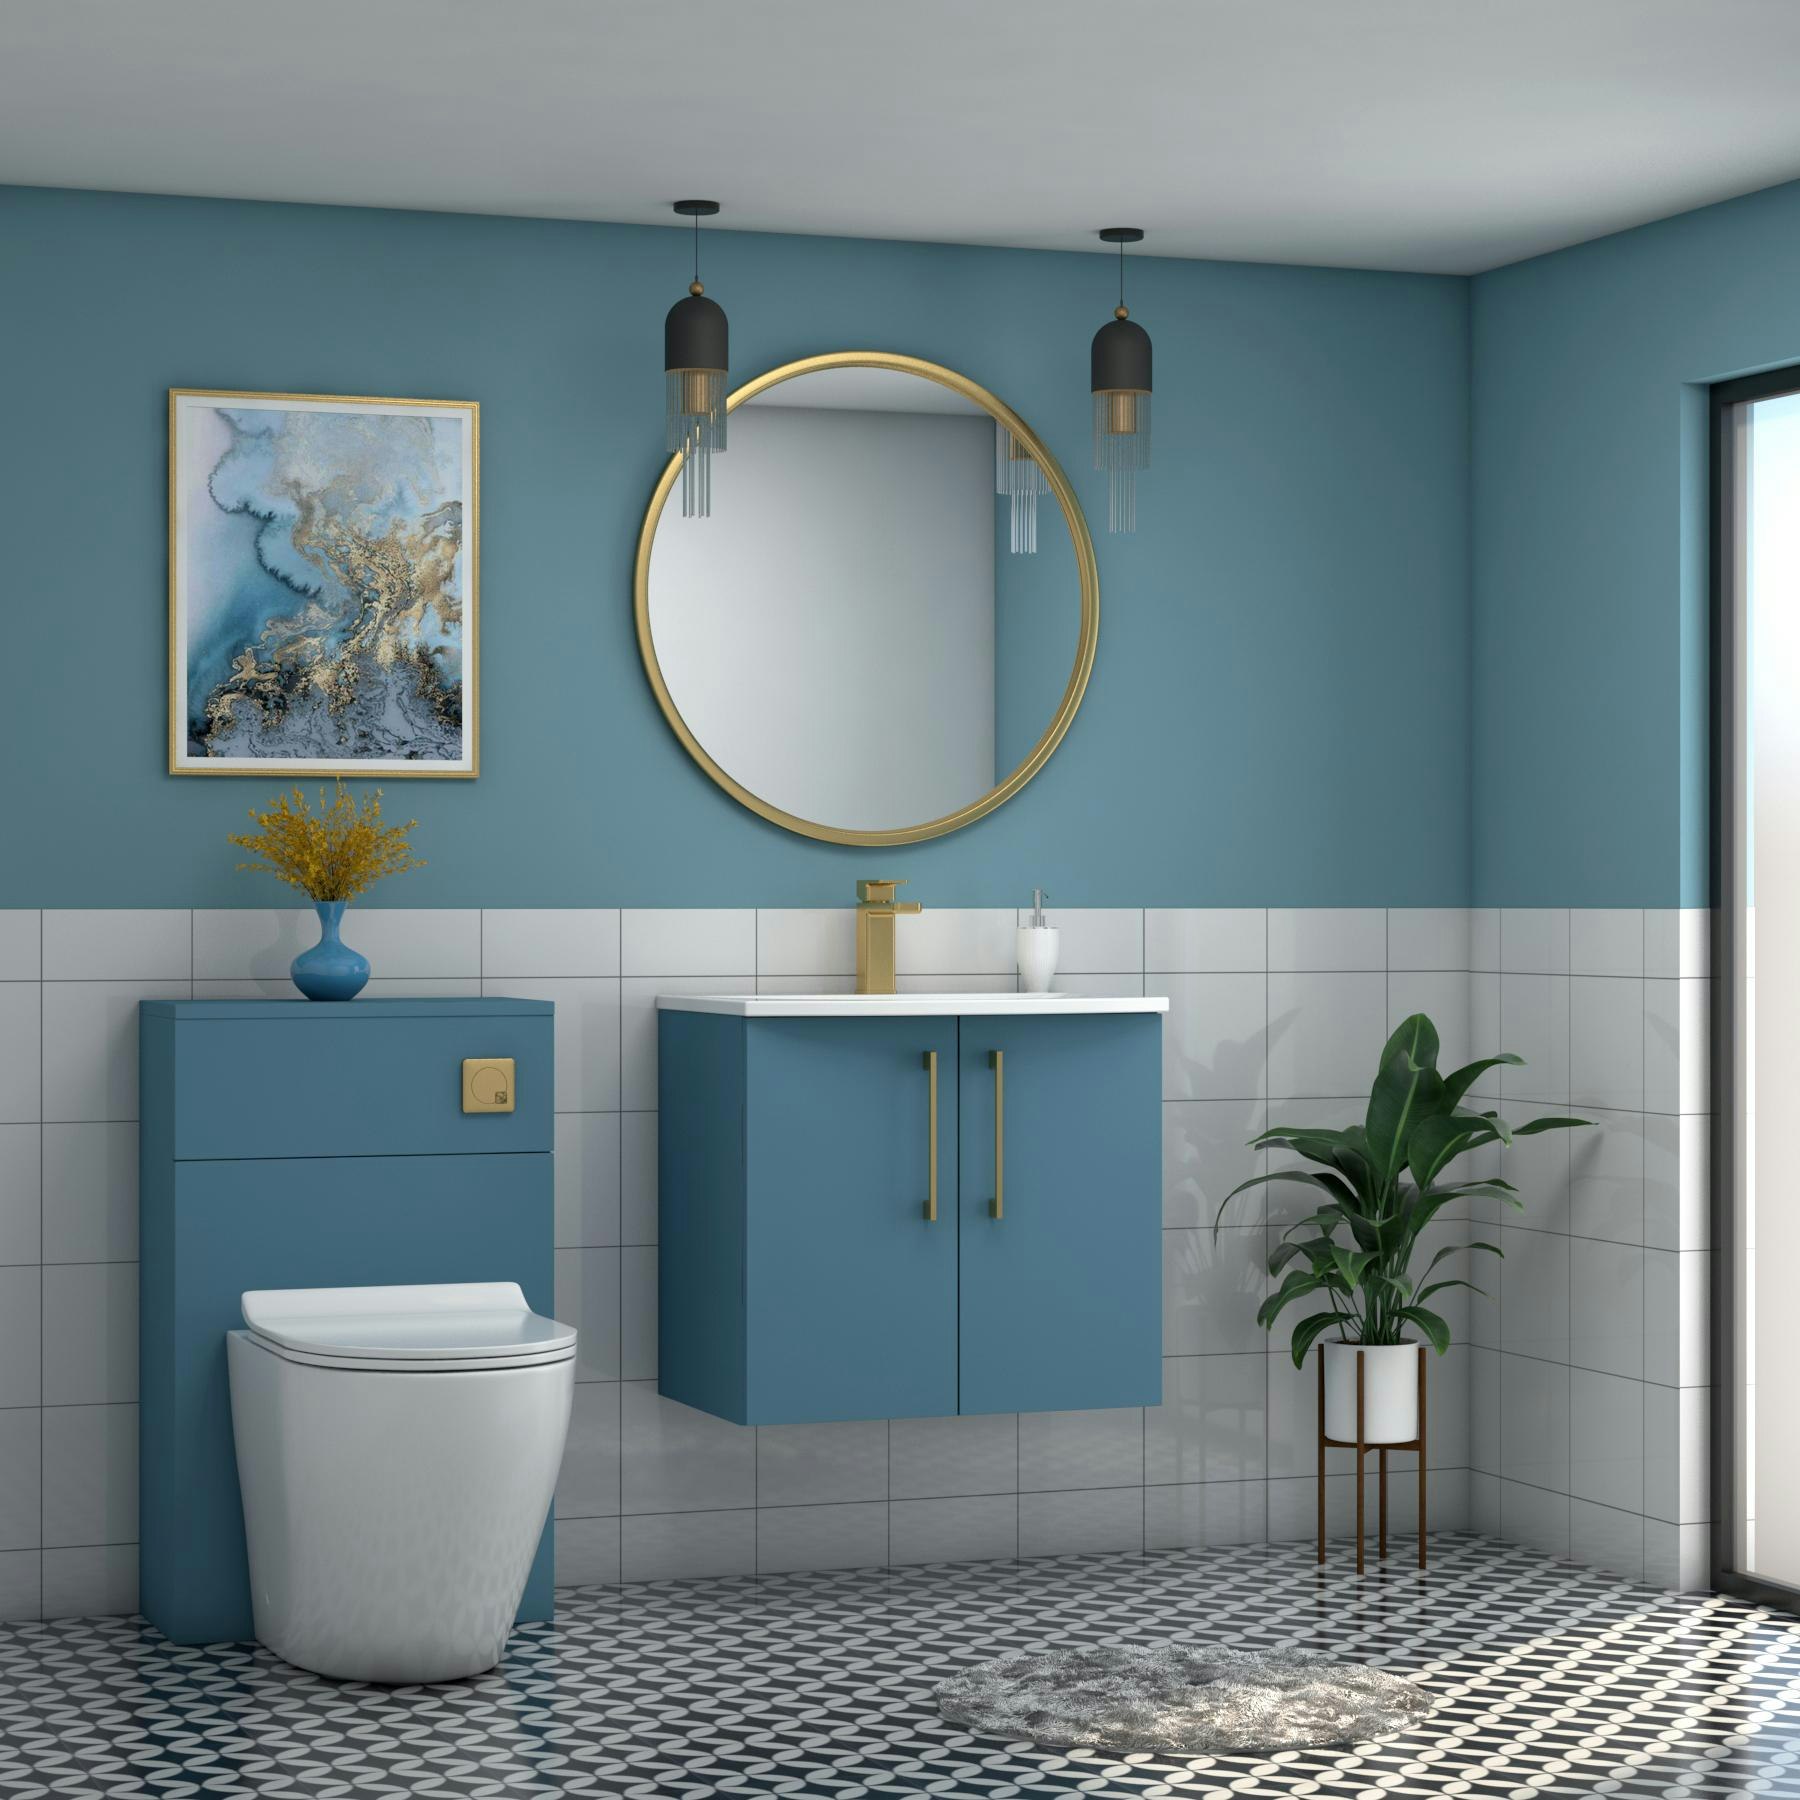 Modena Satin Blue 2 Door Wall Mounted Vanity Unit with Curved Basin - Optional Size & Handles